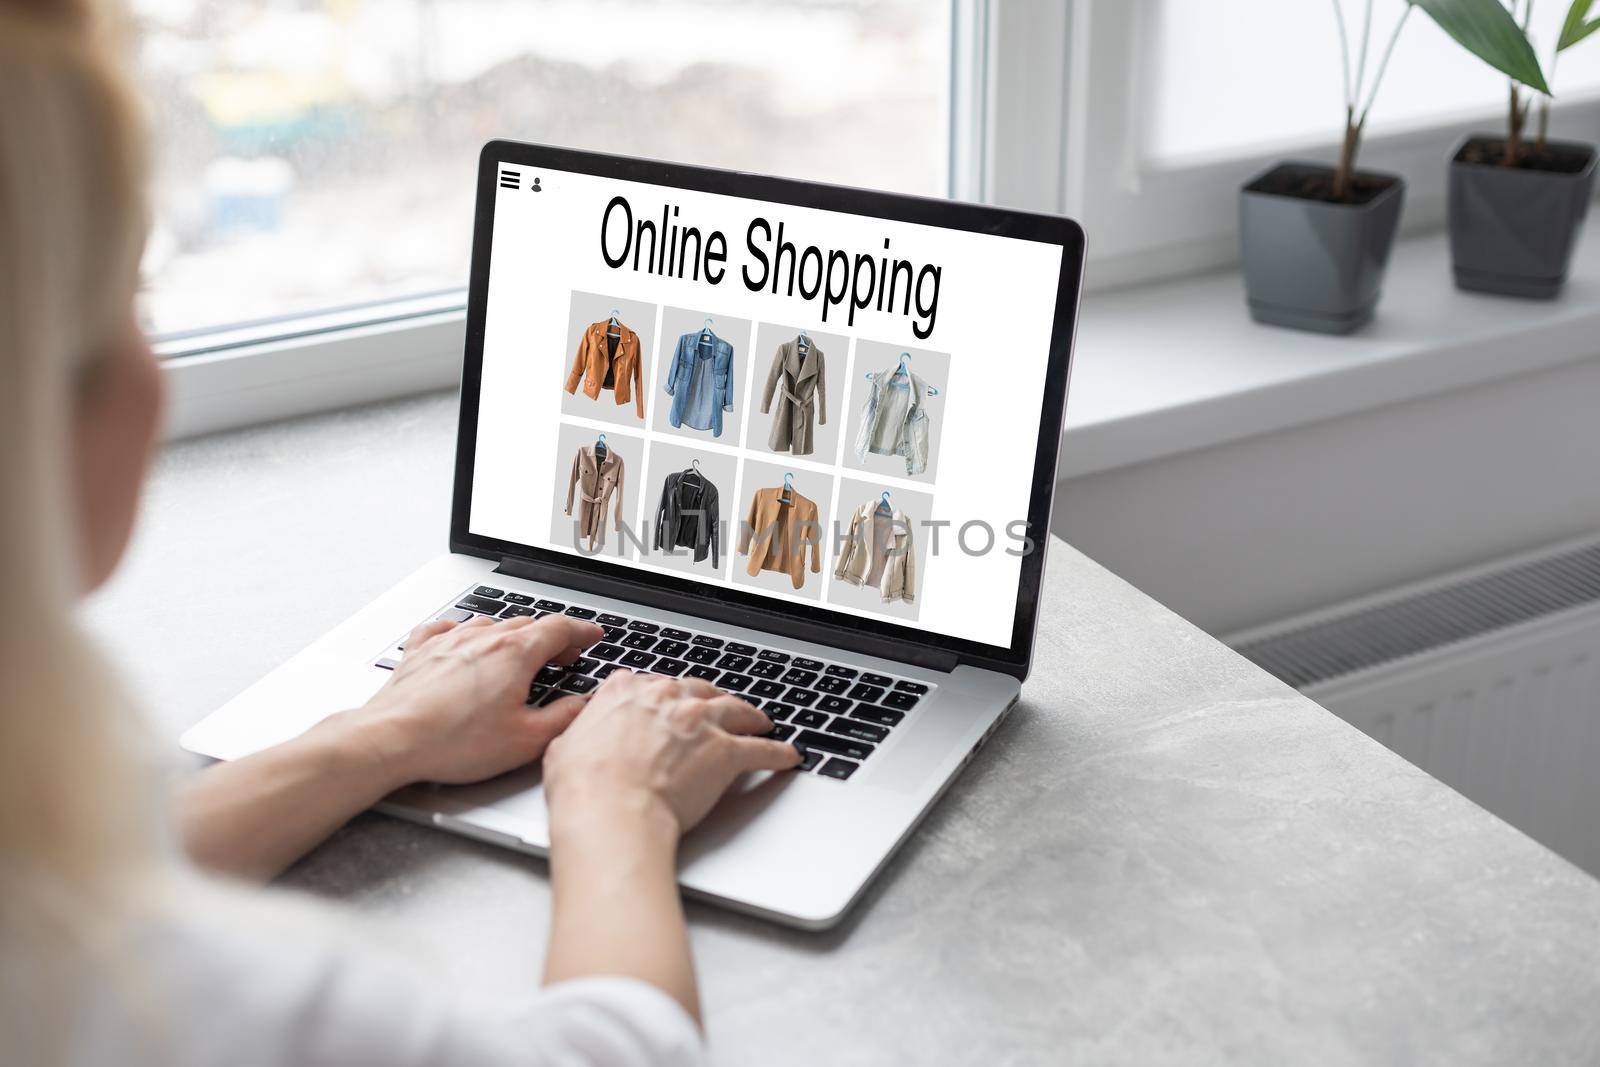 Online Shopping Website on Laptop. Easy E-commerce Website Shop by Smartphone, iPhone, iPad and Laptop. Close up Hands Using Smartphone Shopping Cart read Online Article, Blog. Digital Payment gateway by Andelov13